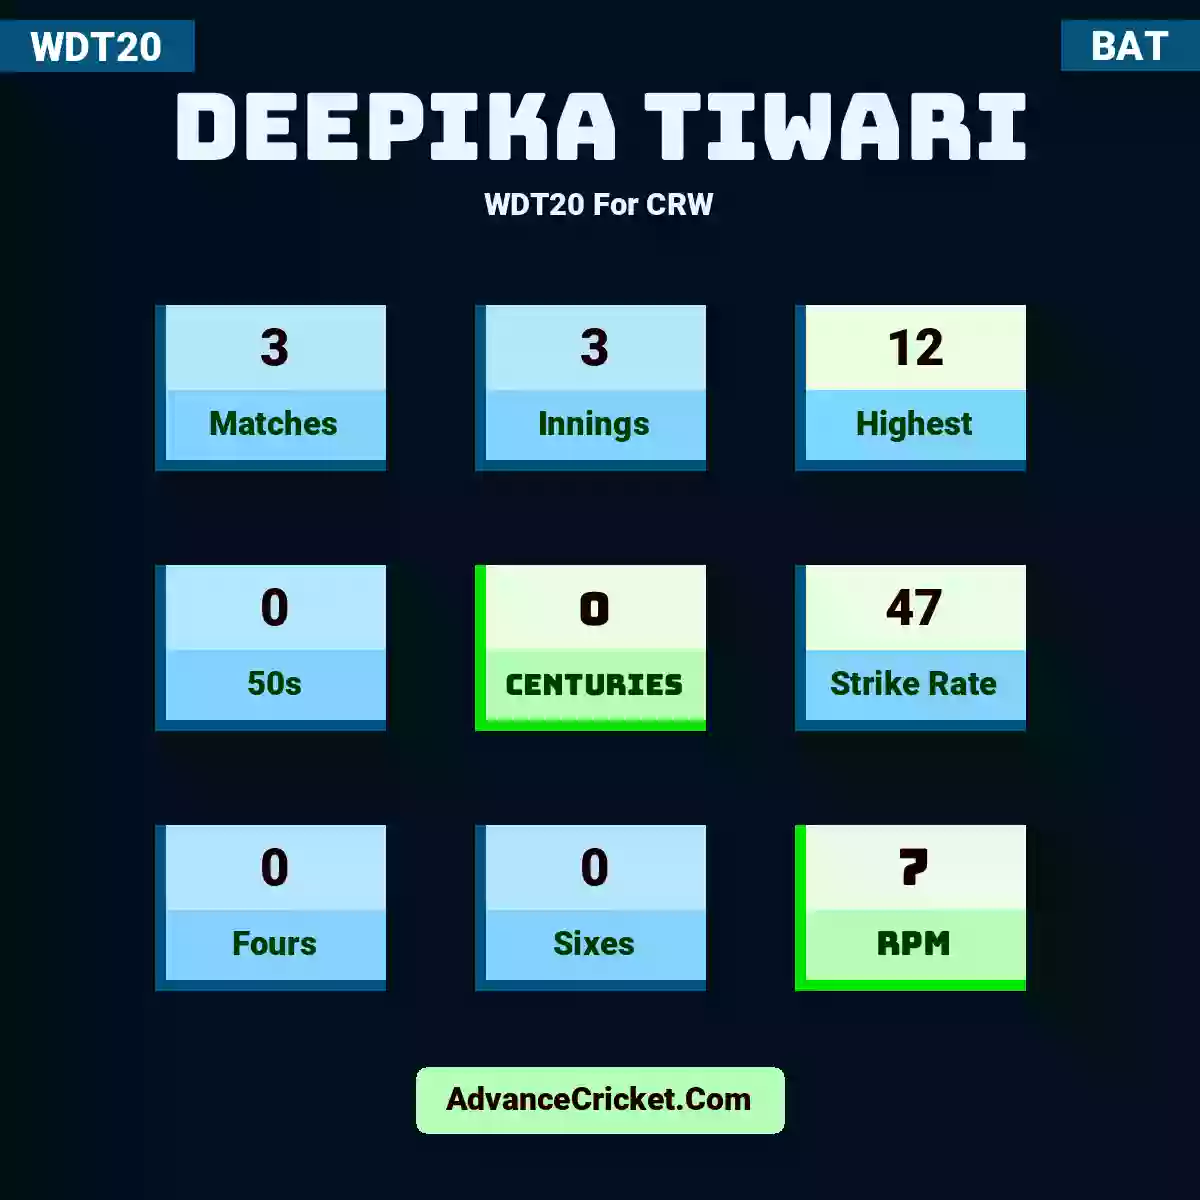 Deepika Tiwari WDT20  For CRW, Deepika Tiwari played 3 matches, scored 12 runs as highest, 0 half-centuries, and 0 centuries, with a strike rate of 47. D.Tiwari hit 0 fours and 0 sixes, with an RPM of 7.